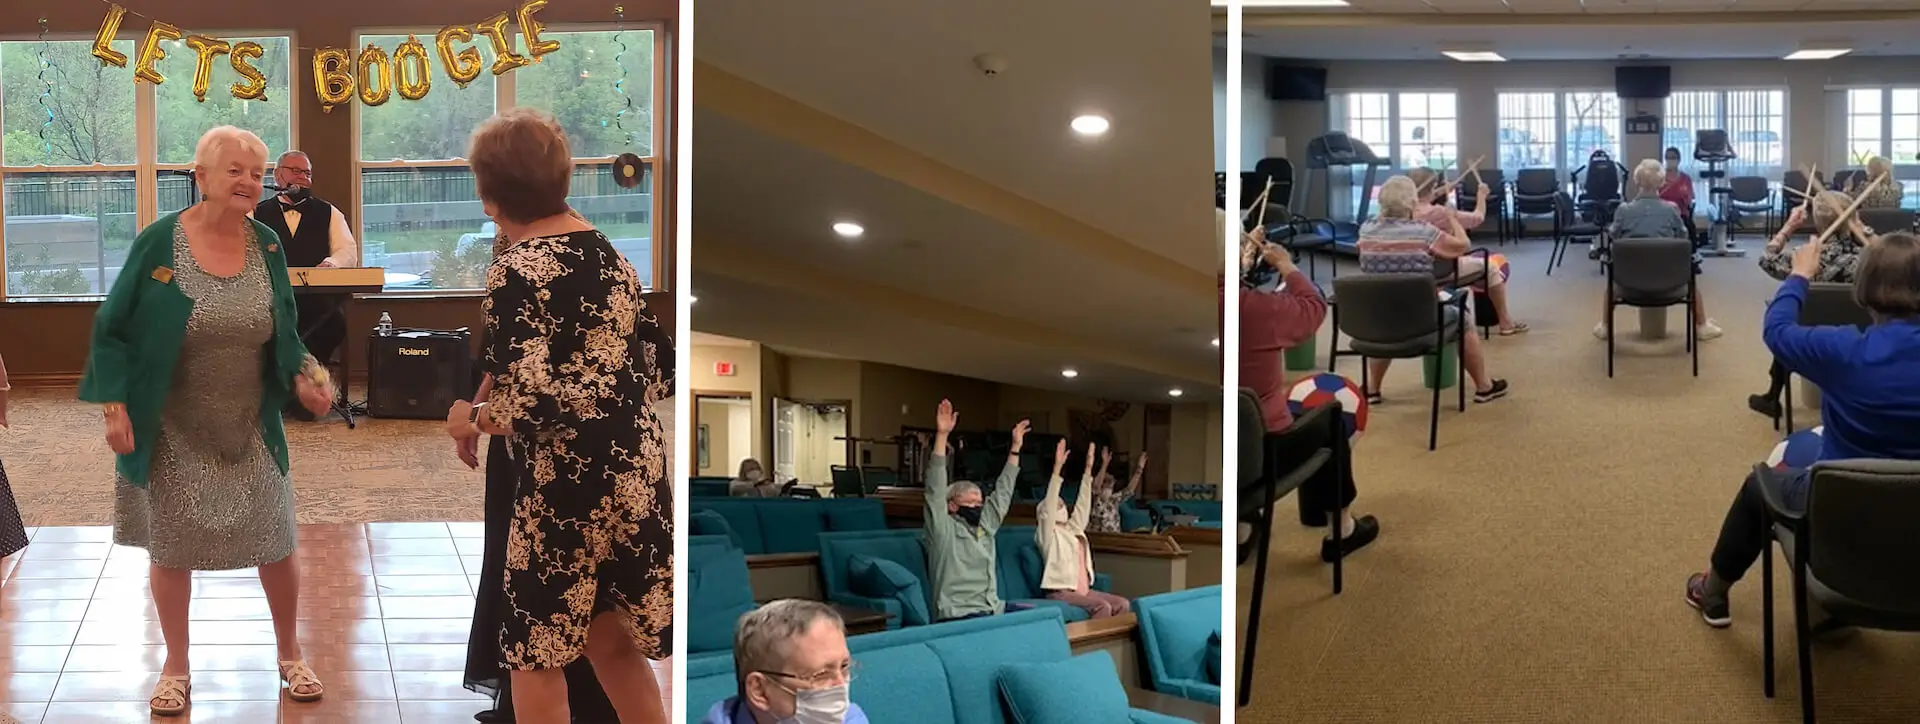 Evergreen Crossings (South Windsor, CT) declared it was time to boogie and treated our seniors to a prom night featuring popular music from decades past. Whether they took to the dance floor or simply clapped their hands or tapped their toes, the movement was a benefit for all.